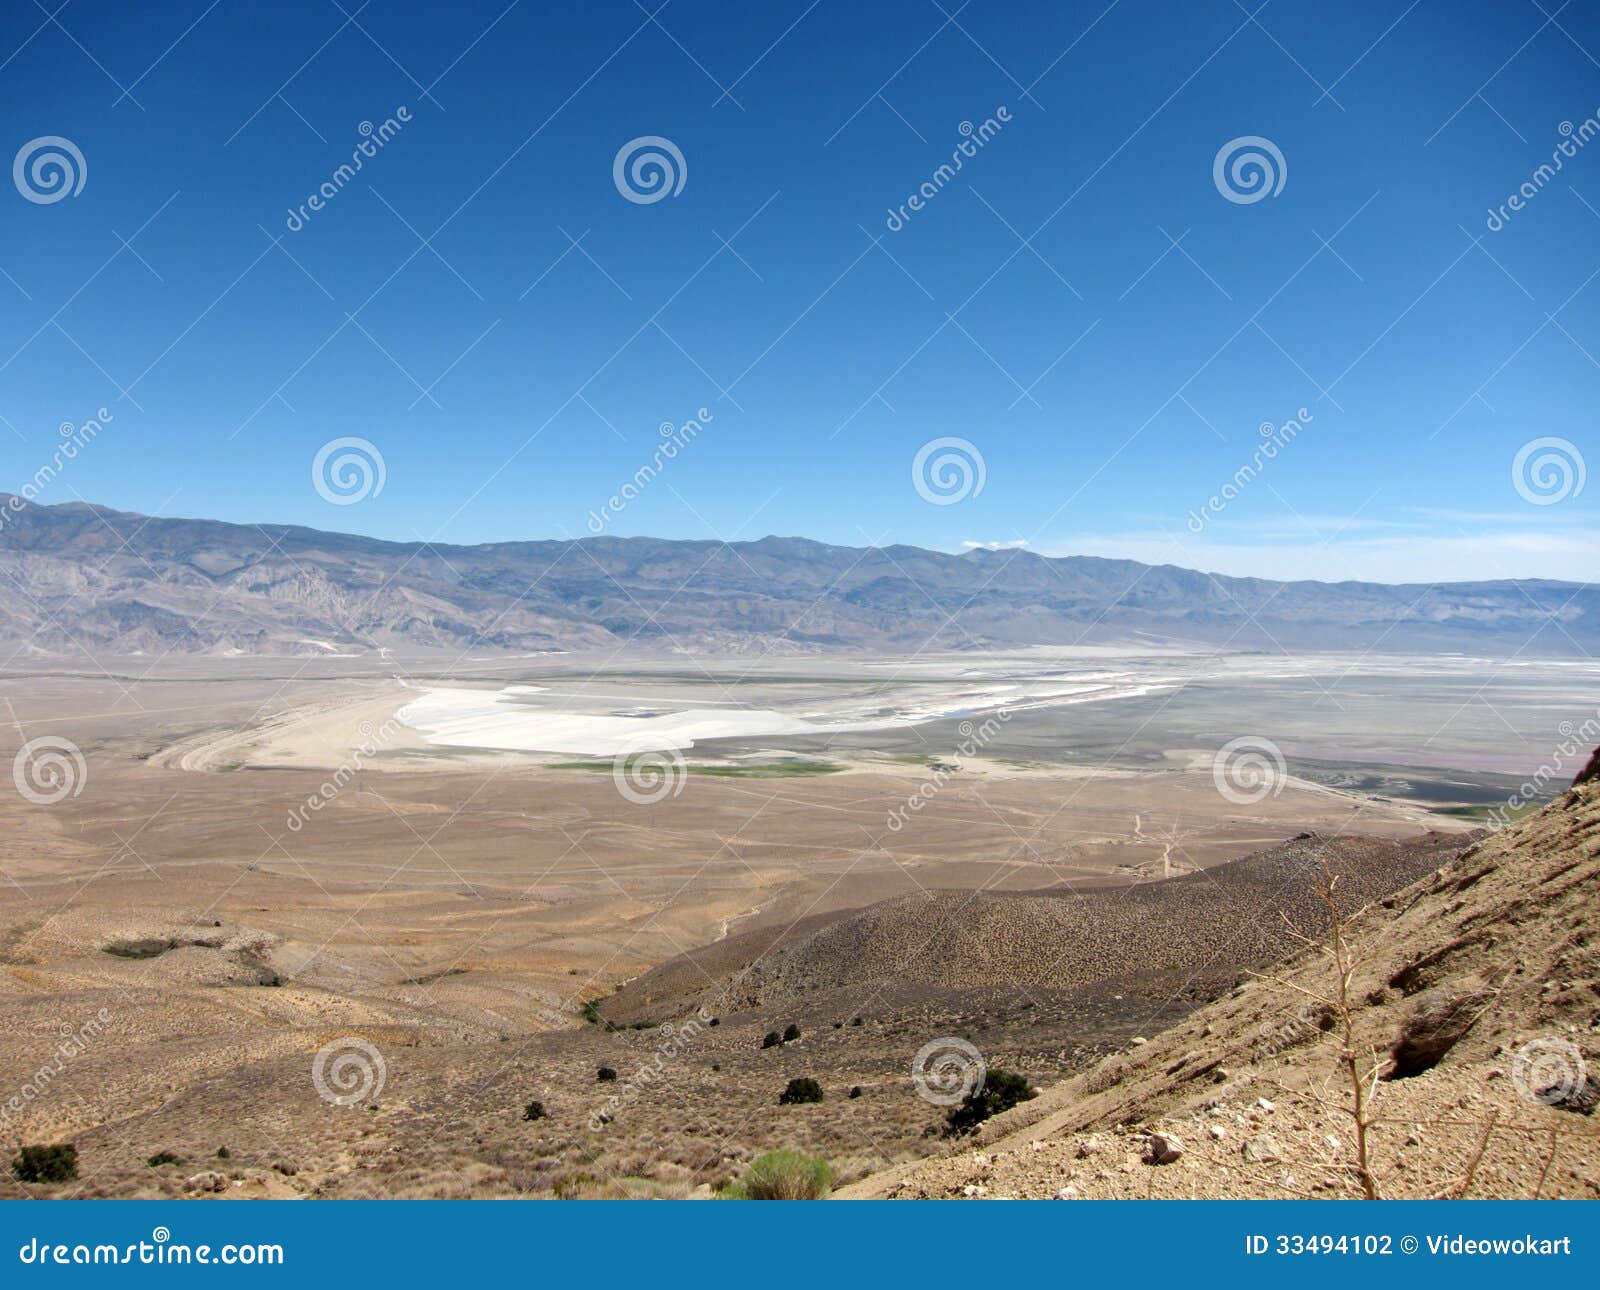 overview of owens valley, california, usa